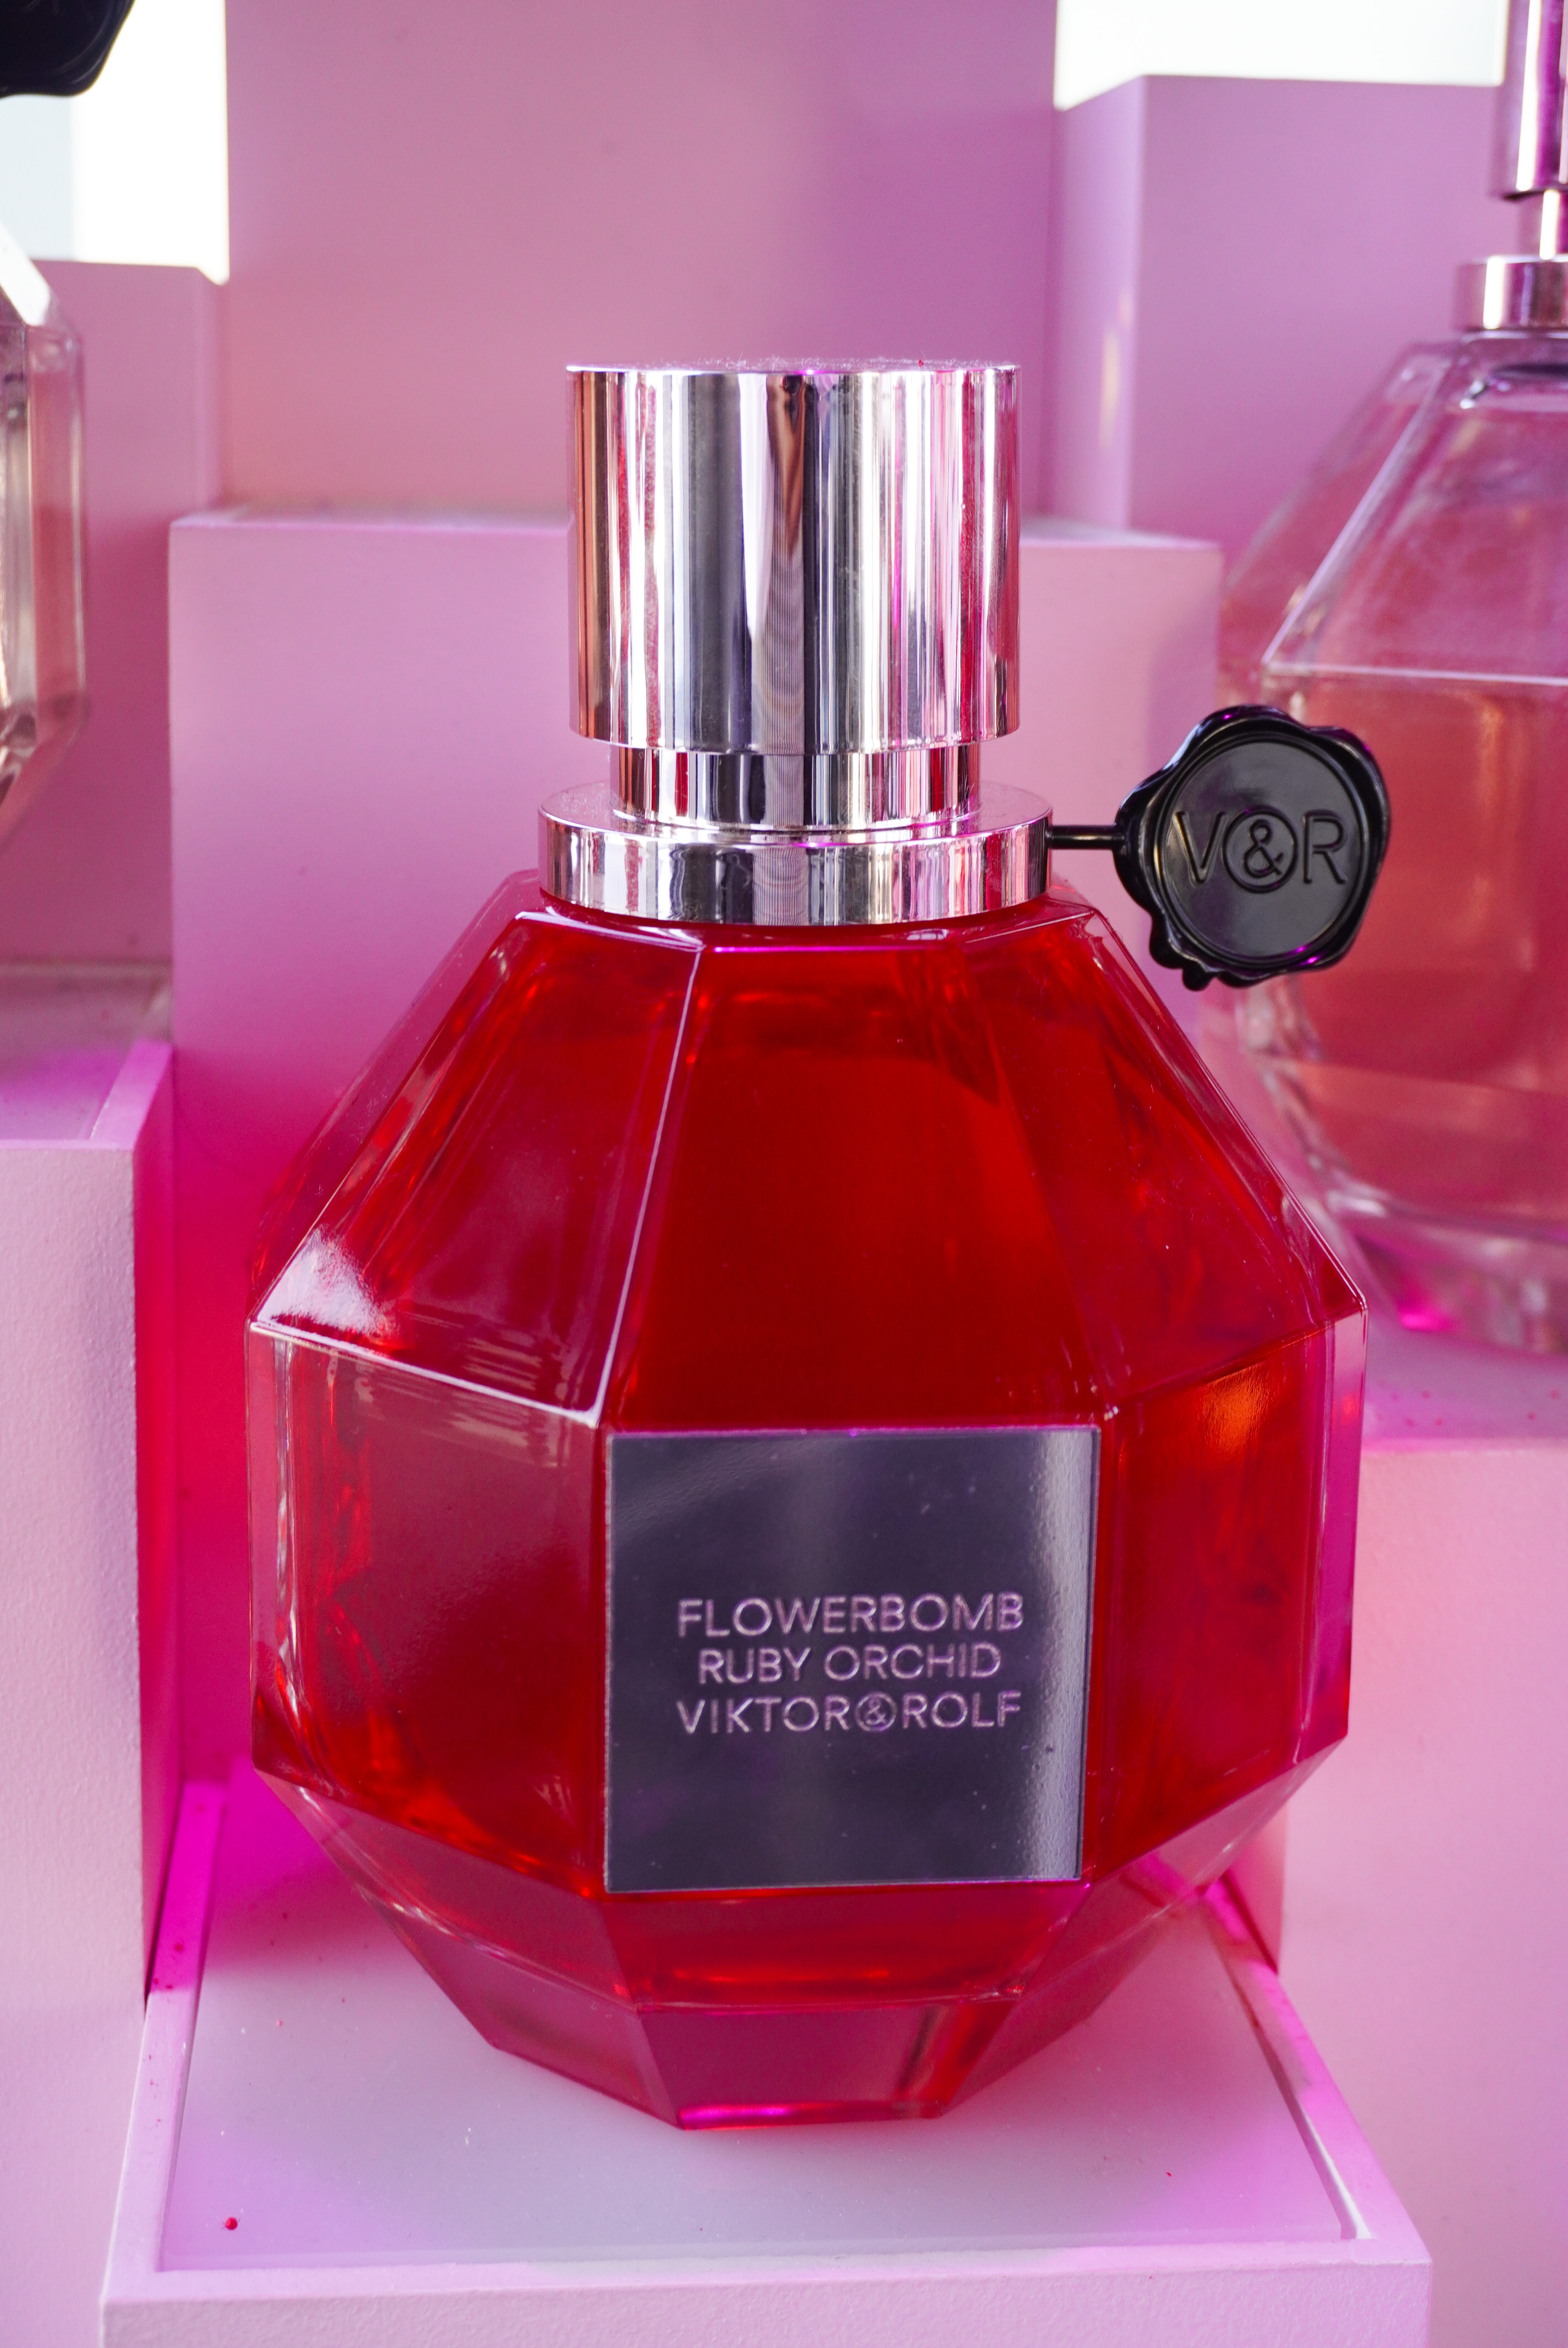 Image of the Viktor & Rolf Flowerbomb Ruby Orchid perfume prop.